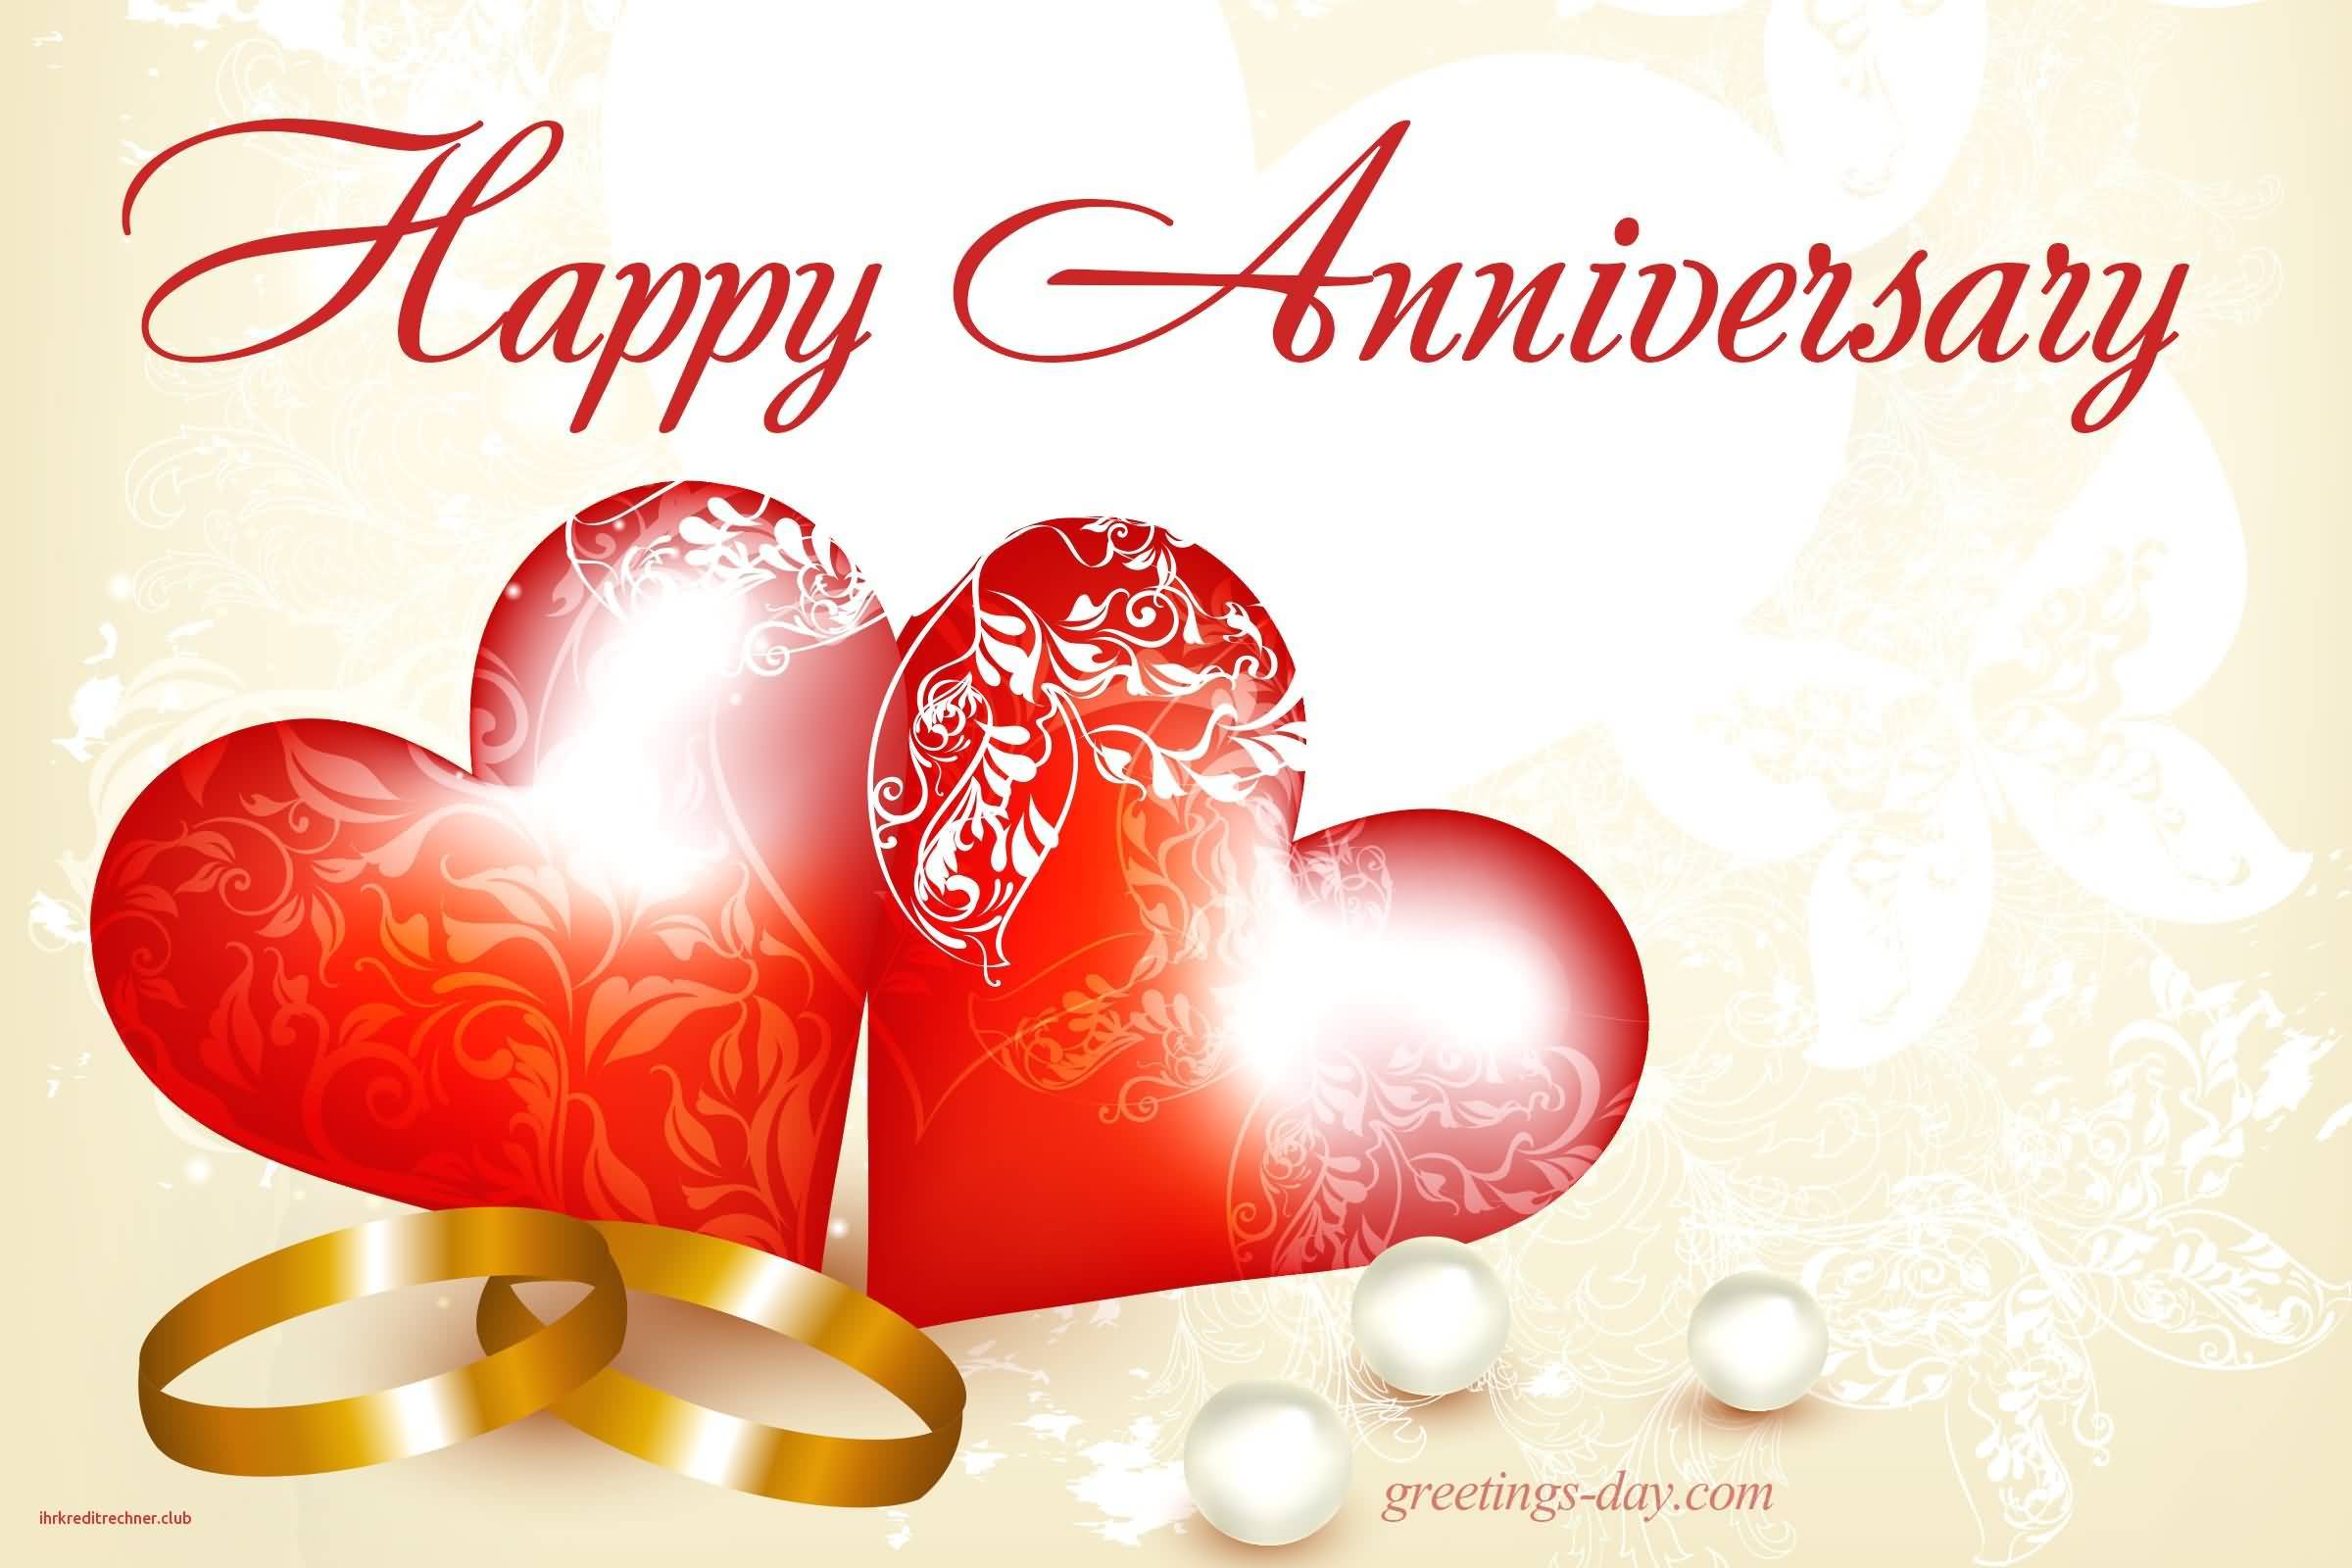 Happy Anniversary Wedding Wishes Images Free Download